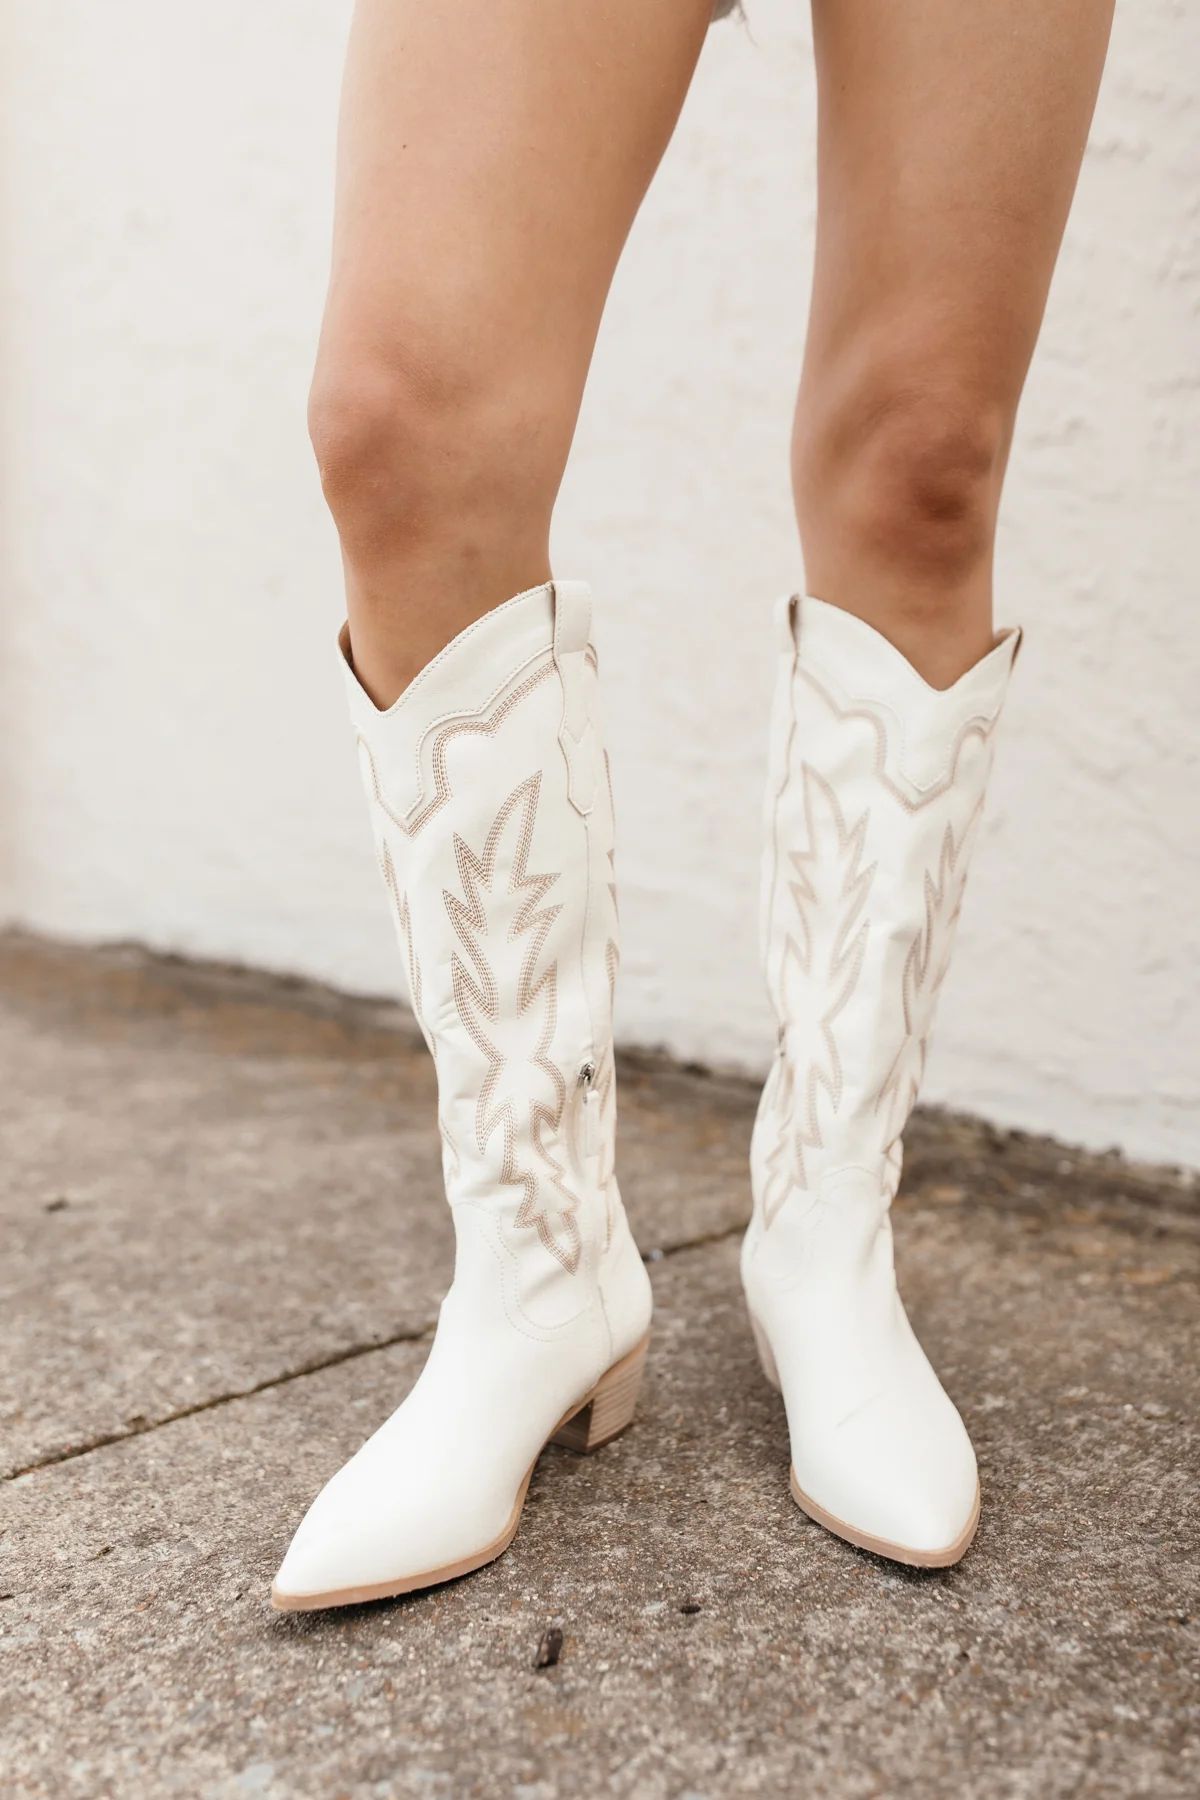 Broadway Boots | The Post